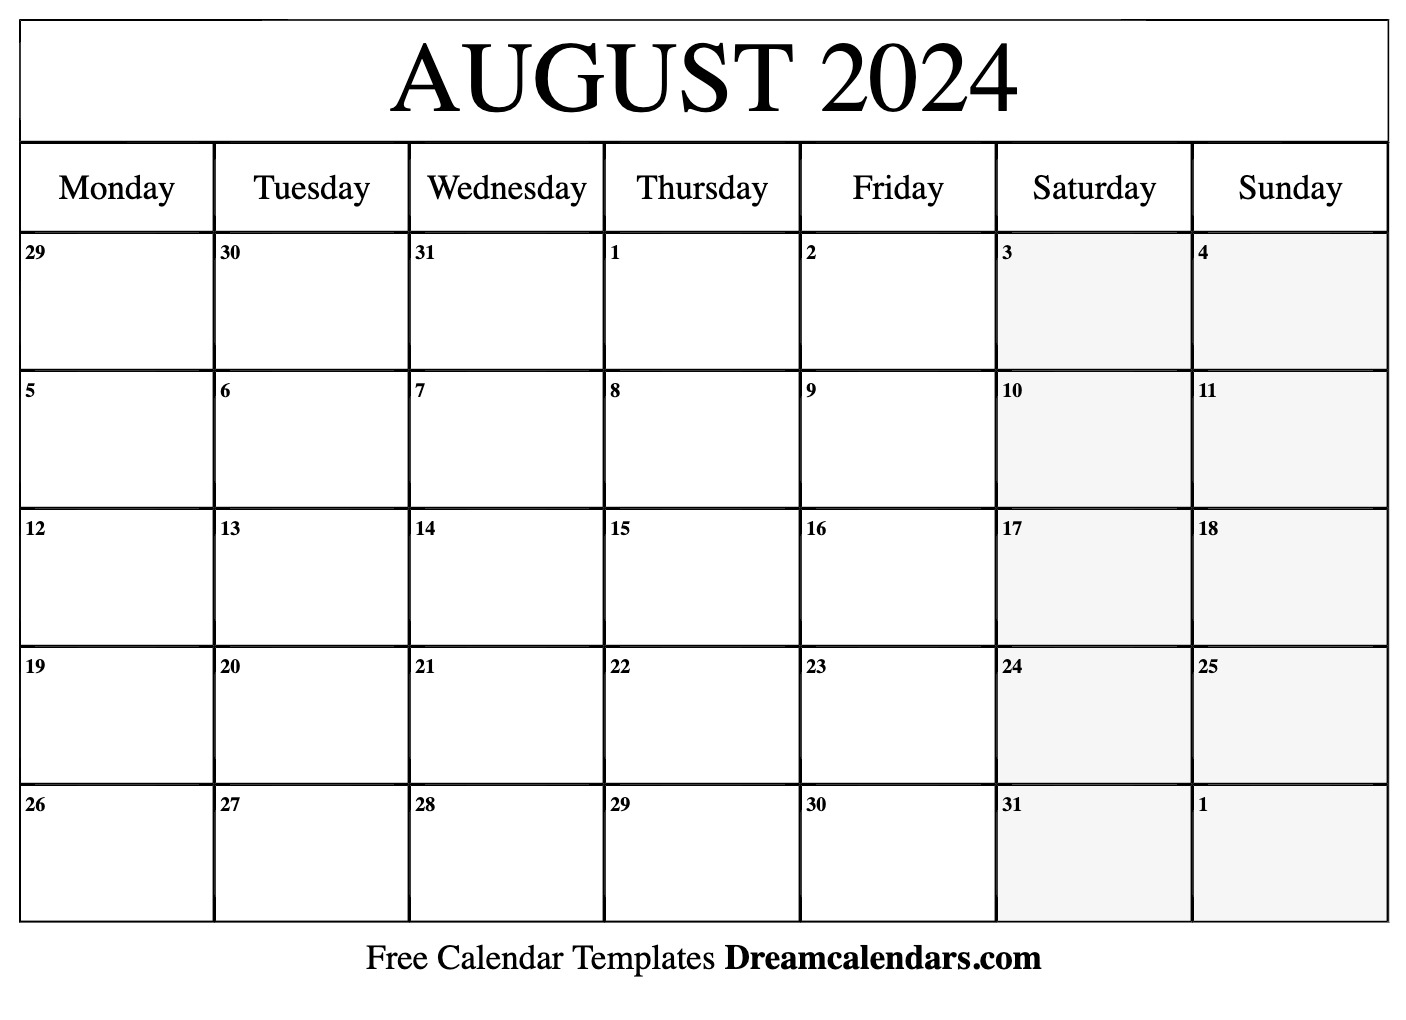 August 2024 Calendar | Free Blank Printable With Holidays for August 2024 Calendar Printable Free